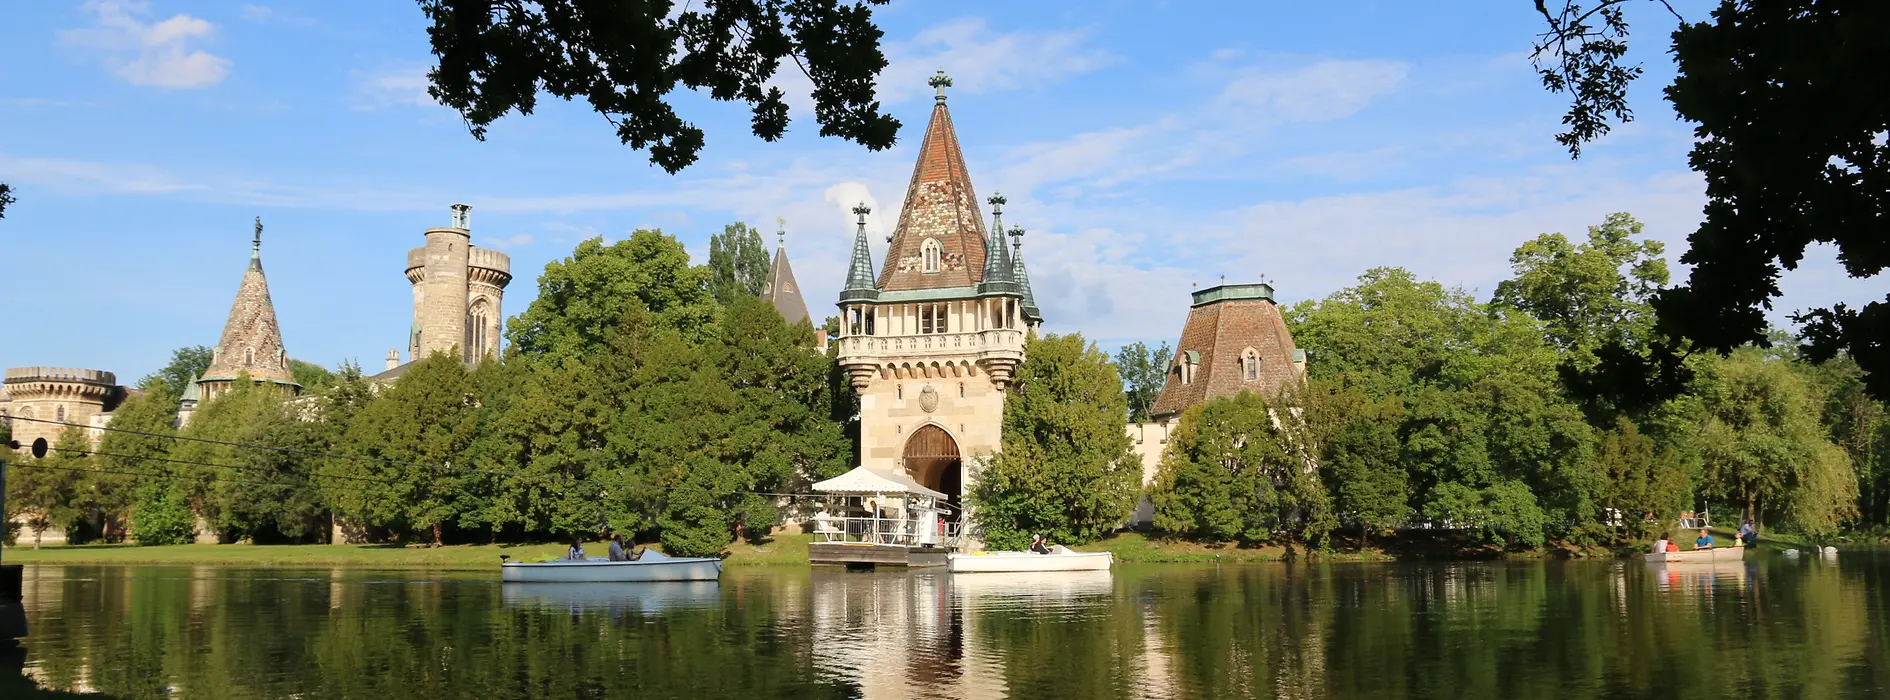 Ferry tower in Laxenburg Castle Park